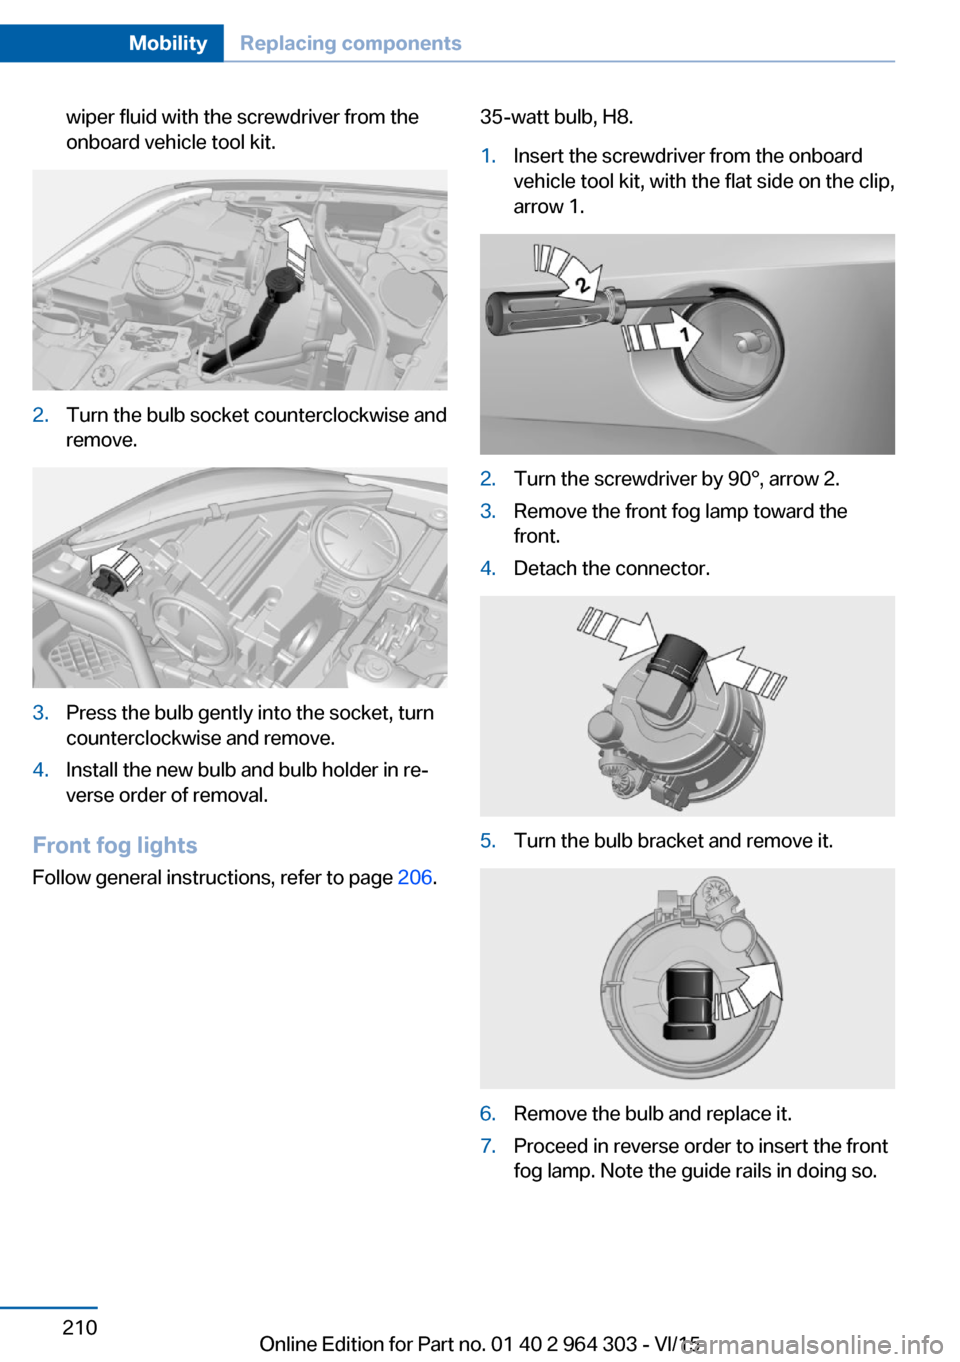 BMW X1 2016 F48 Owners Manual wiper fluid with the screwdriver from the
onboard vehicle tool kit.2.Turn the bulb socket counterclockwise and
remove.3.Press the bulb gently into the socket, turn
counterclockwise and remove.4.Instal